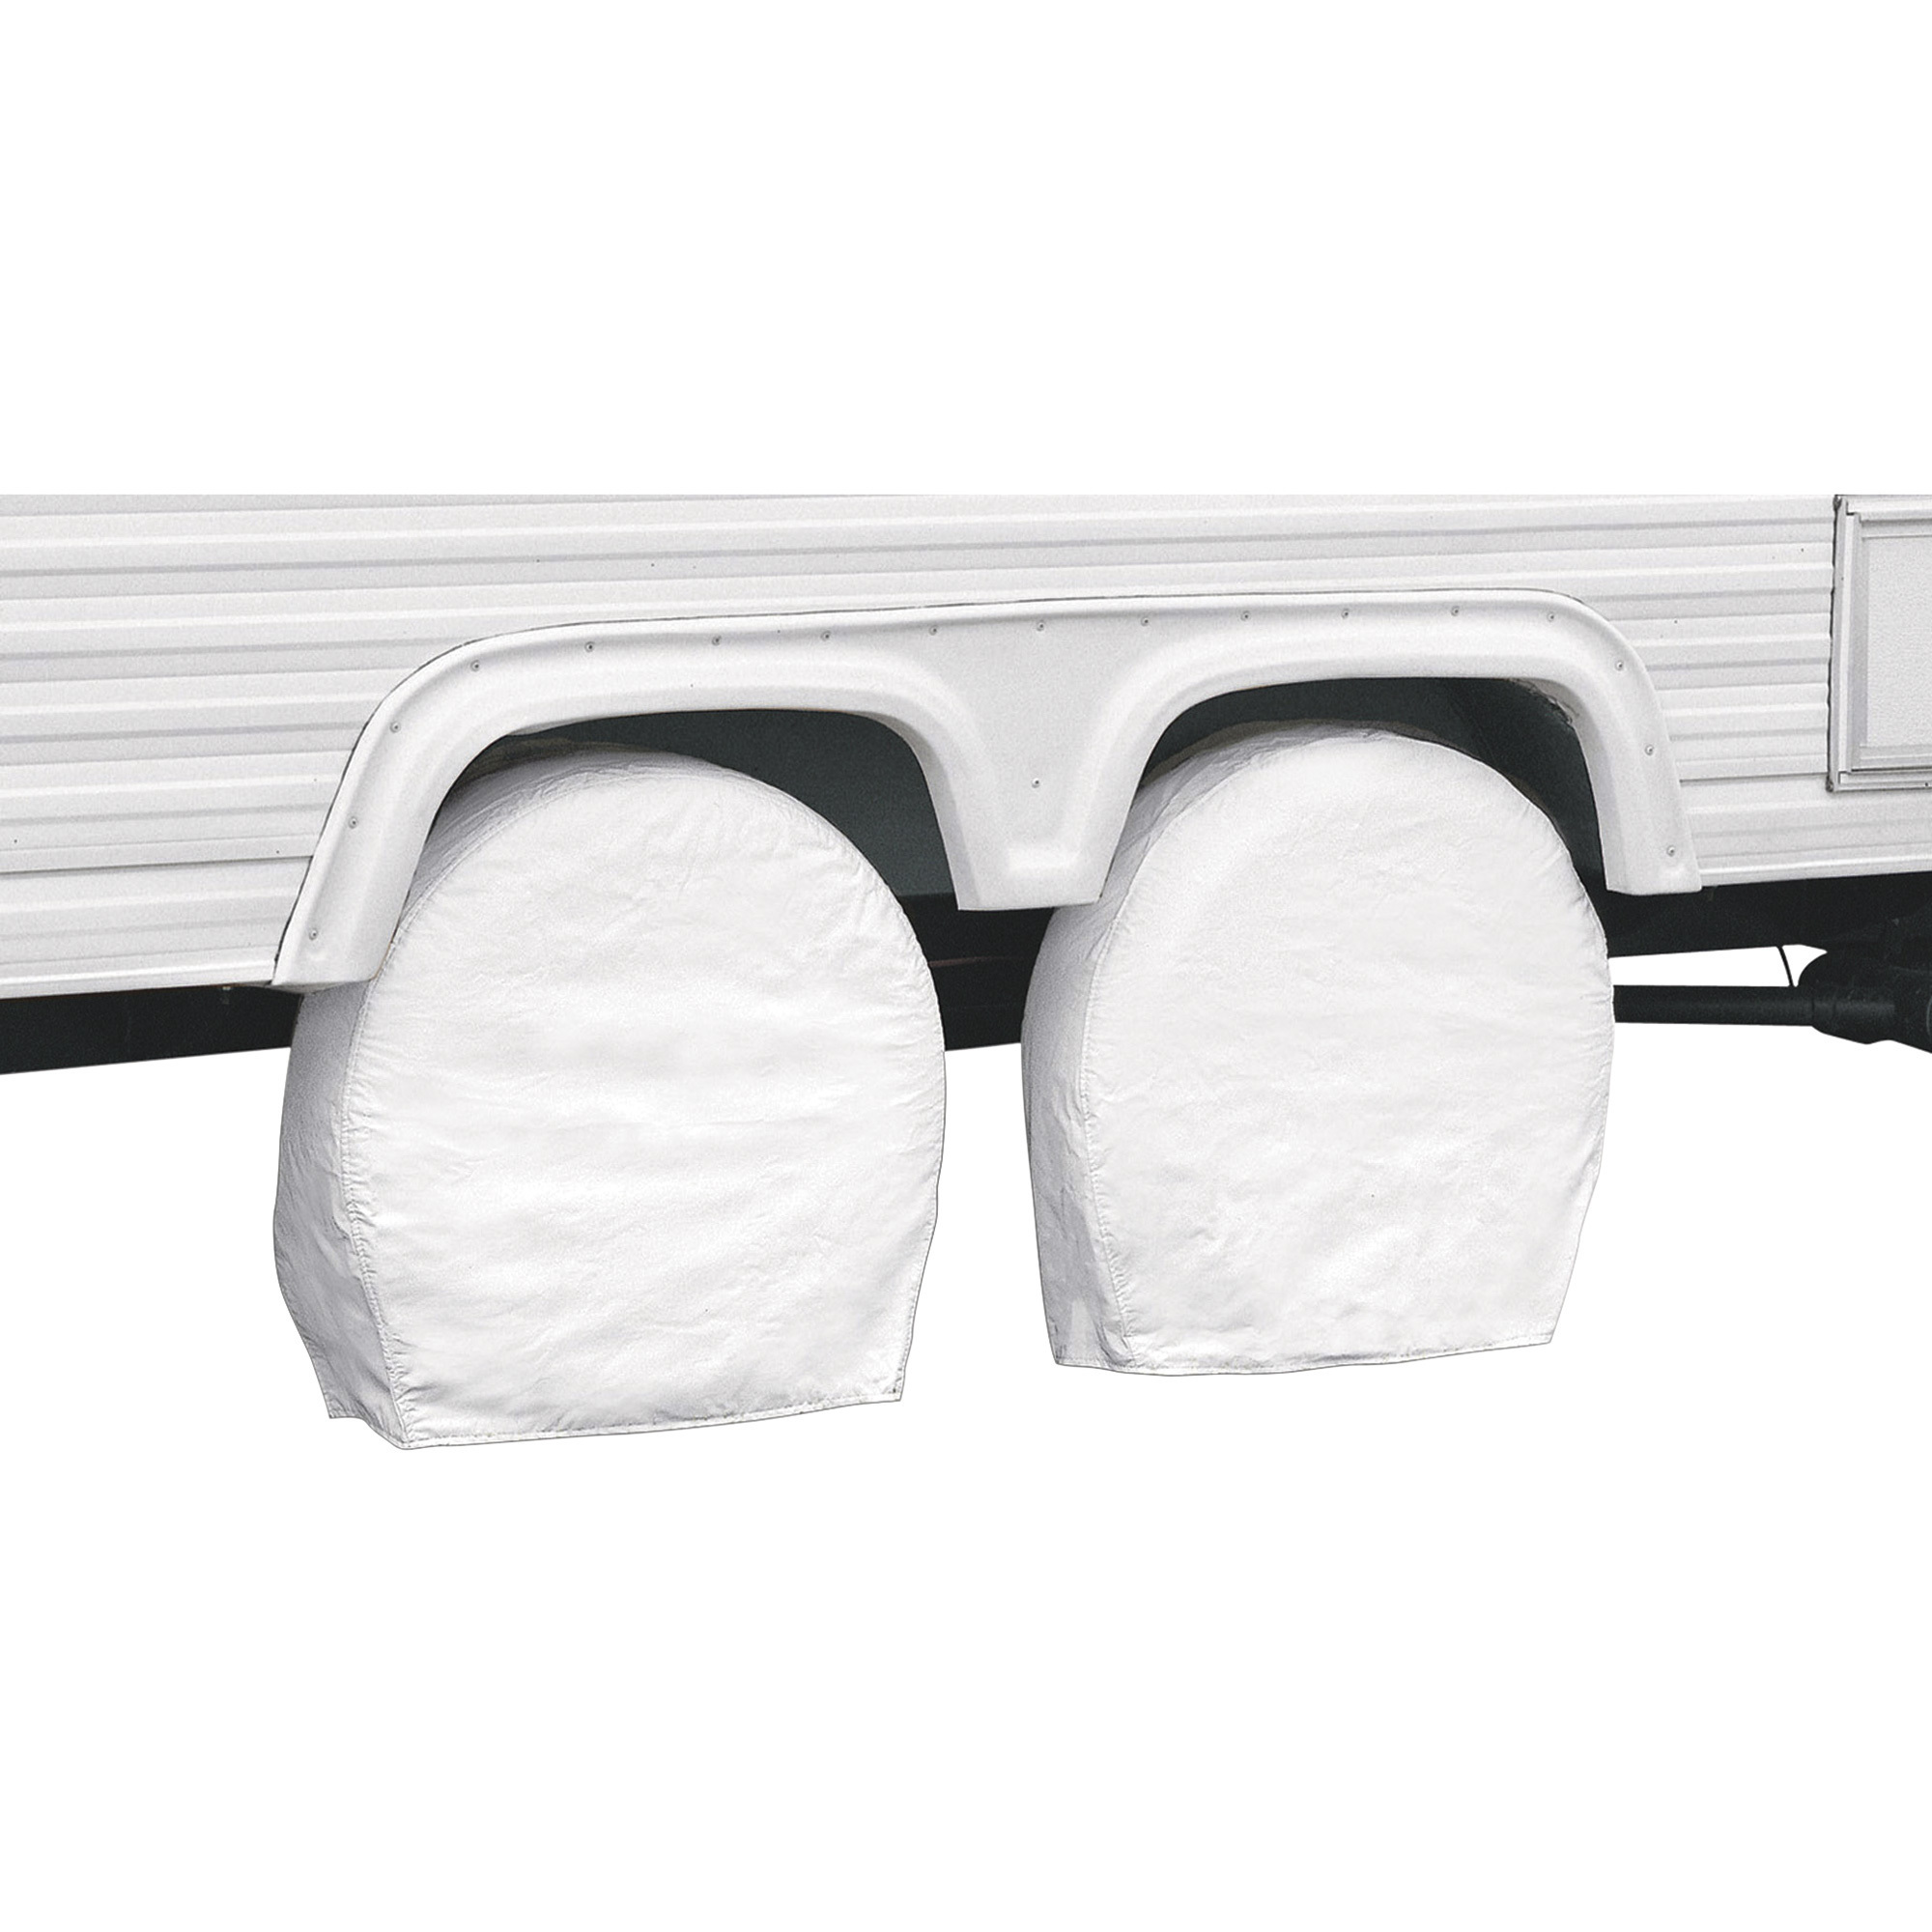 Classic Accessories RV Wheel Covers, Pair, White, Fits 27Inch-30Inch Diameter x 8.75Inch W Tires, Model 76250